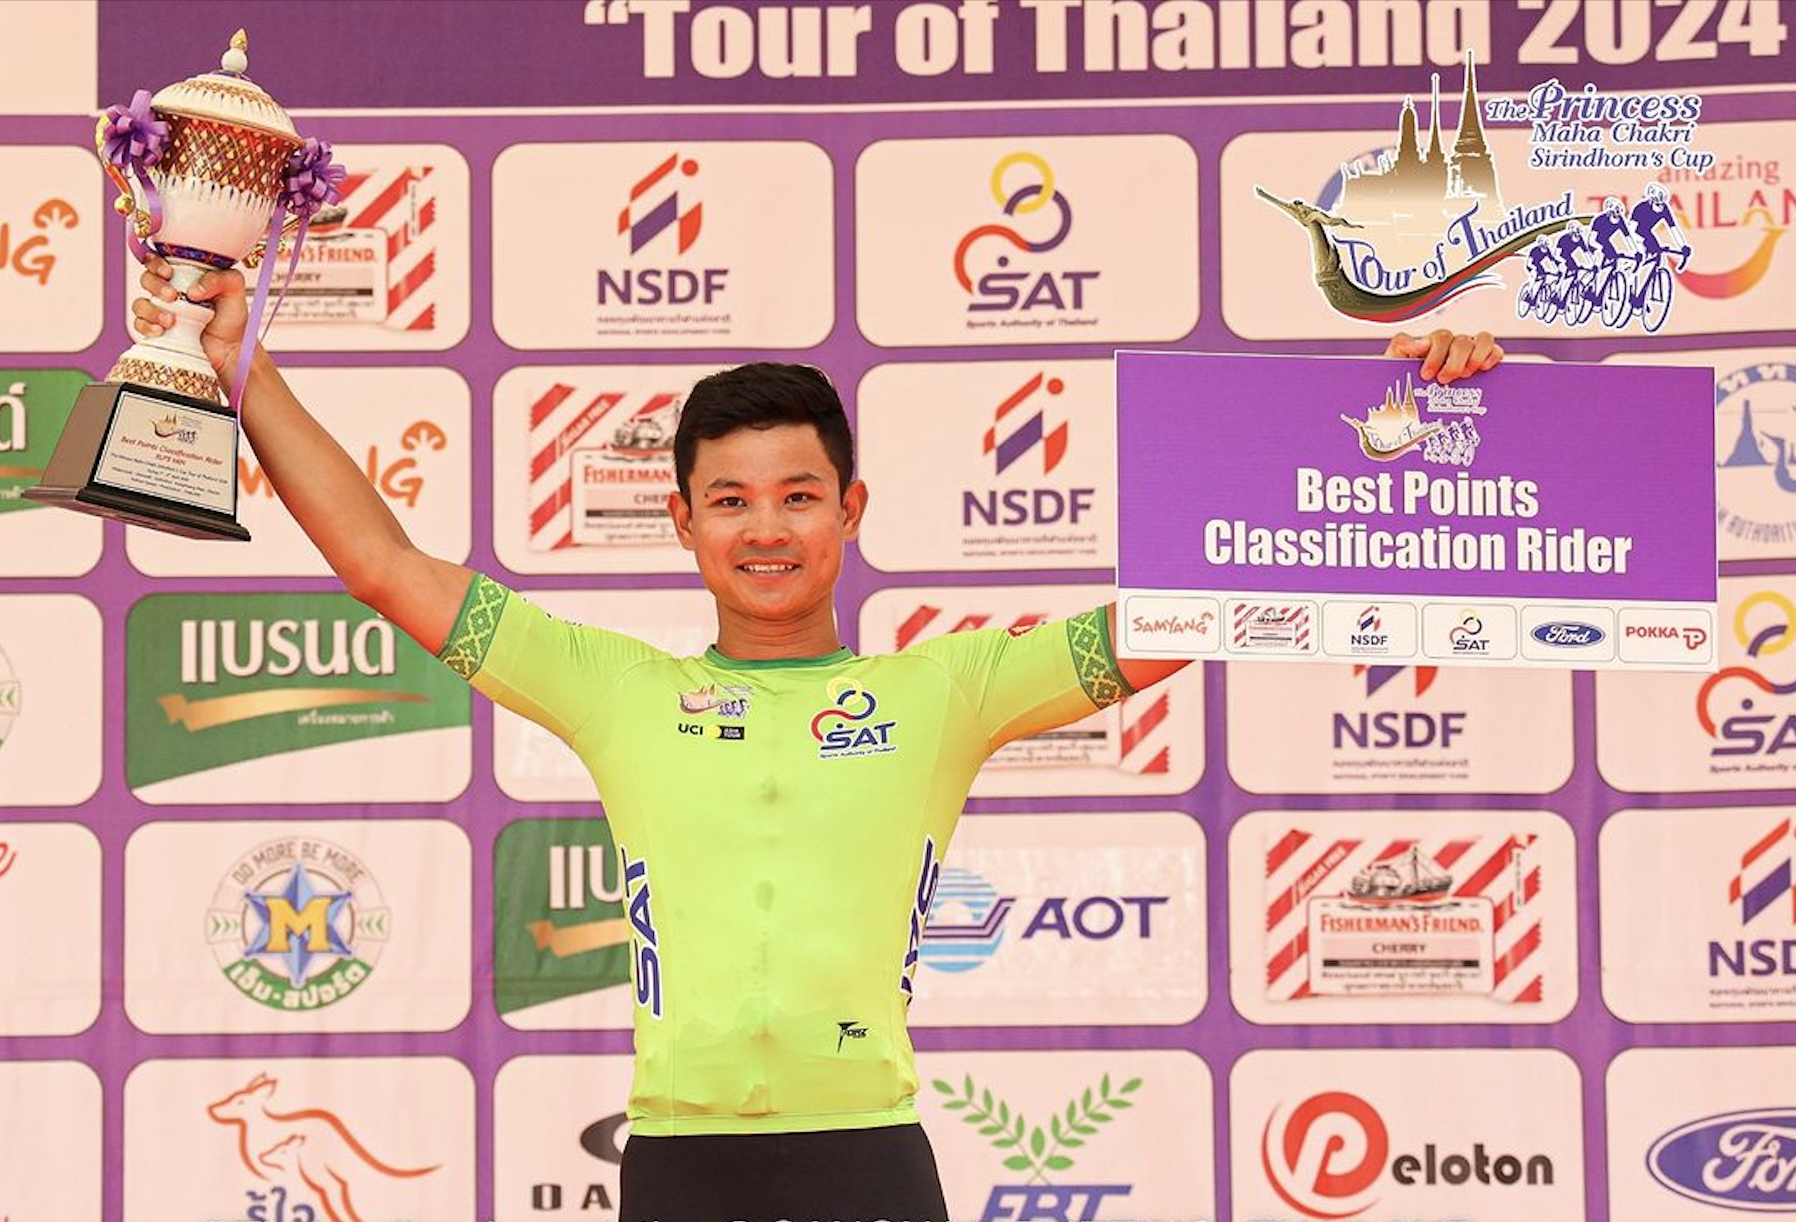 Wake-up call leads to Izzat winning a green jersey at the Tour of Thailand